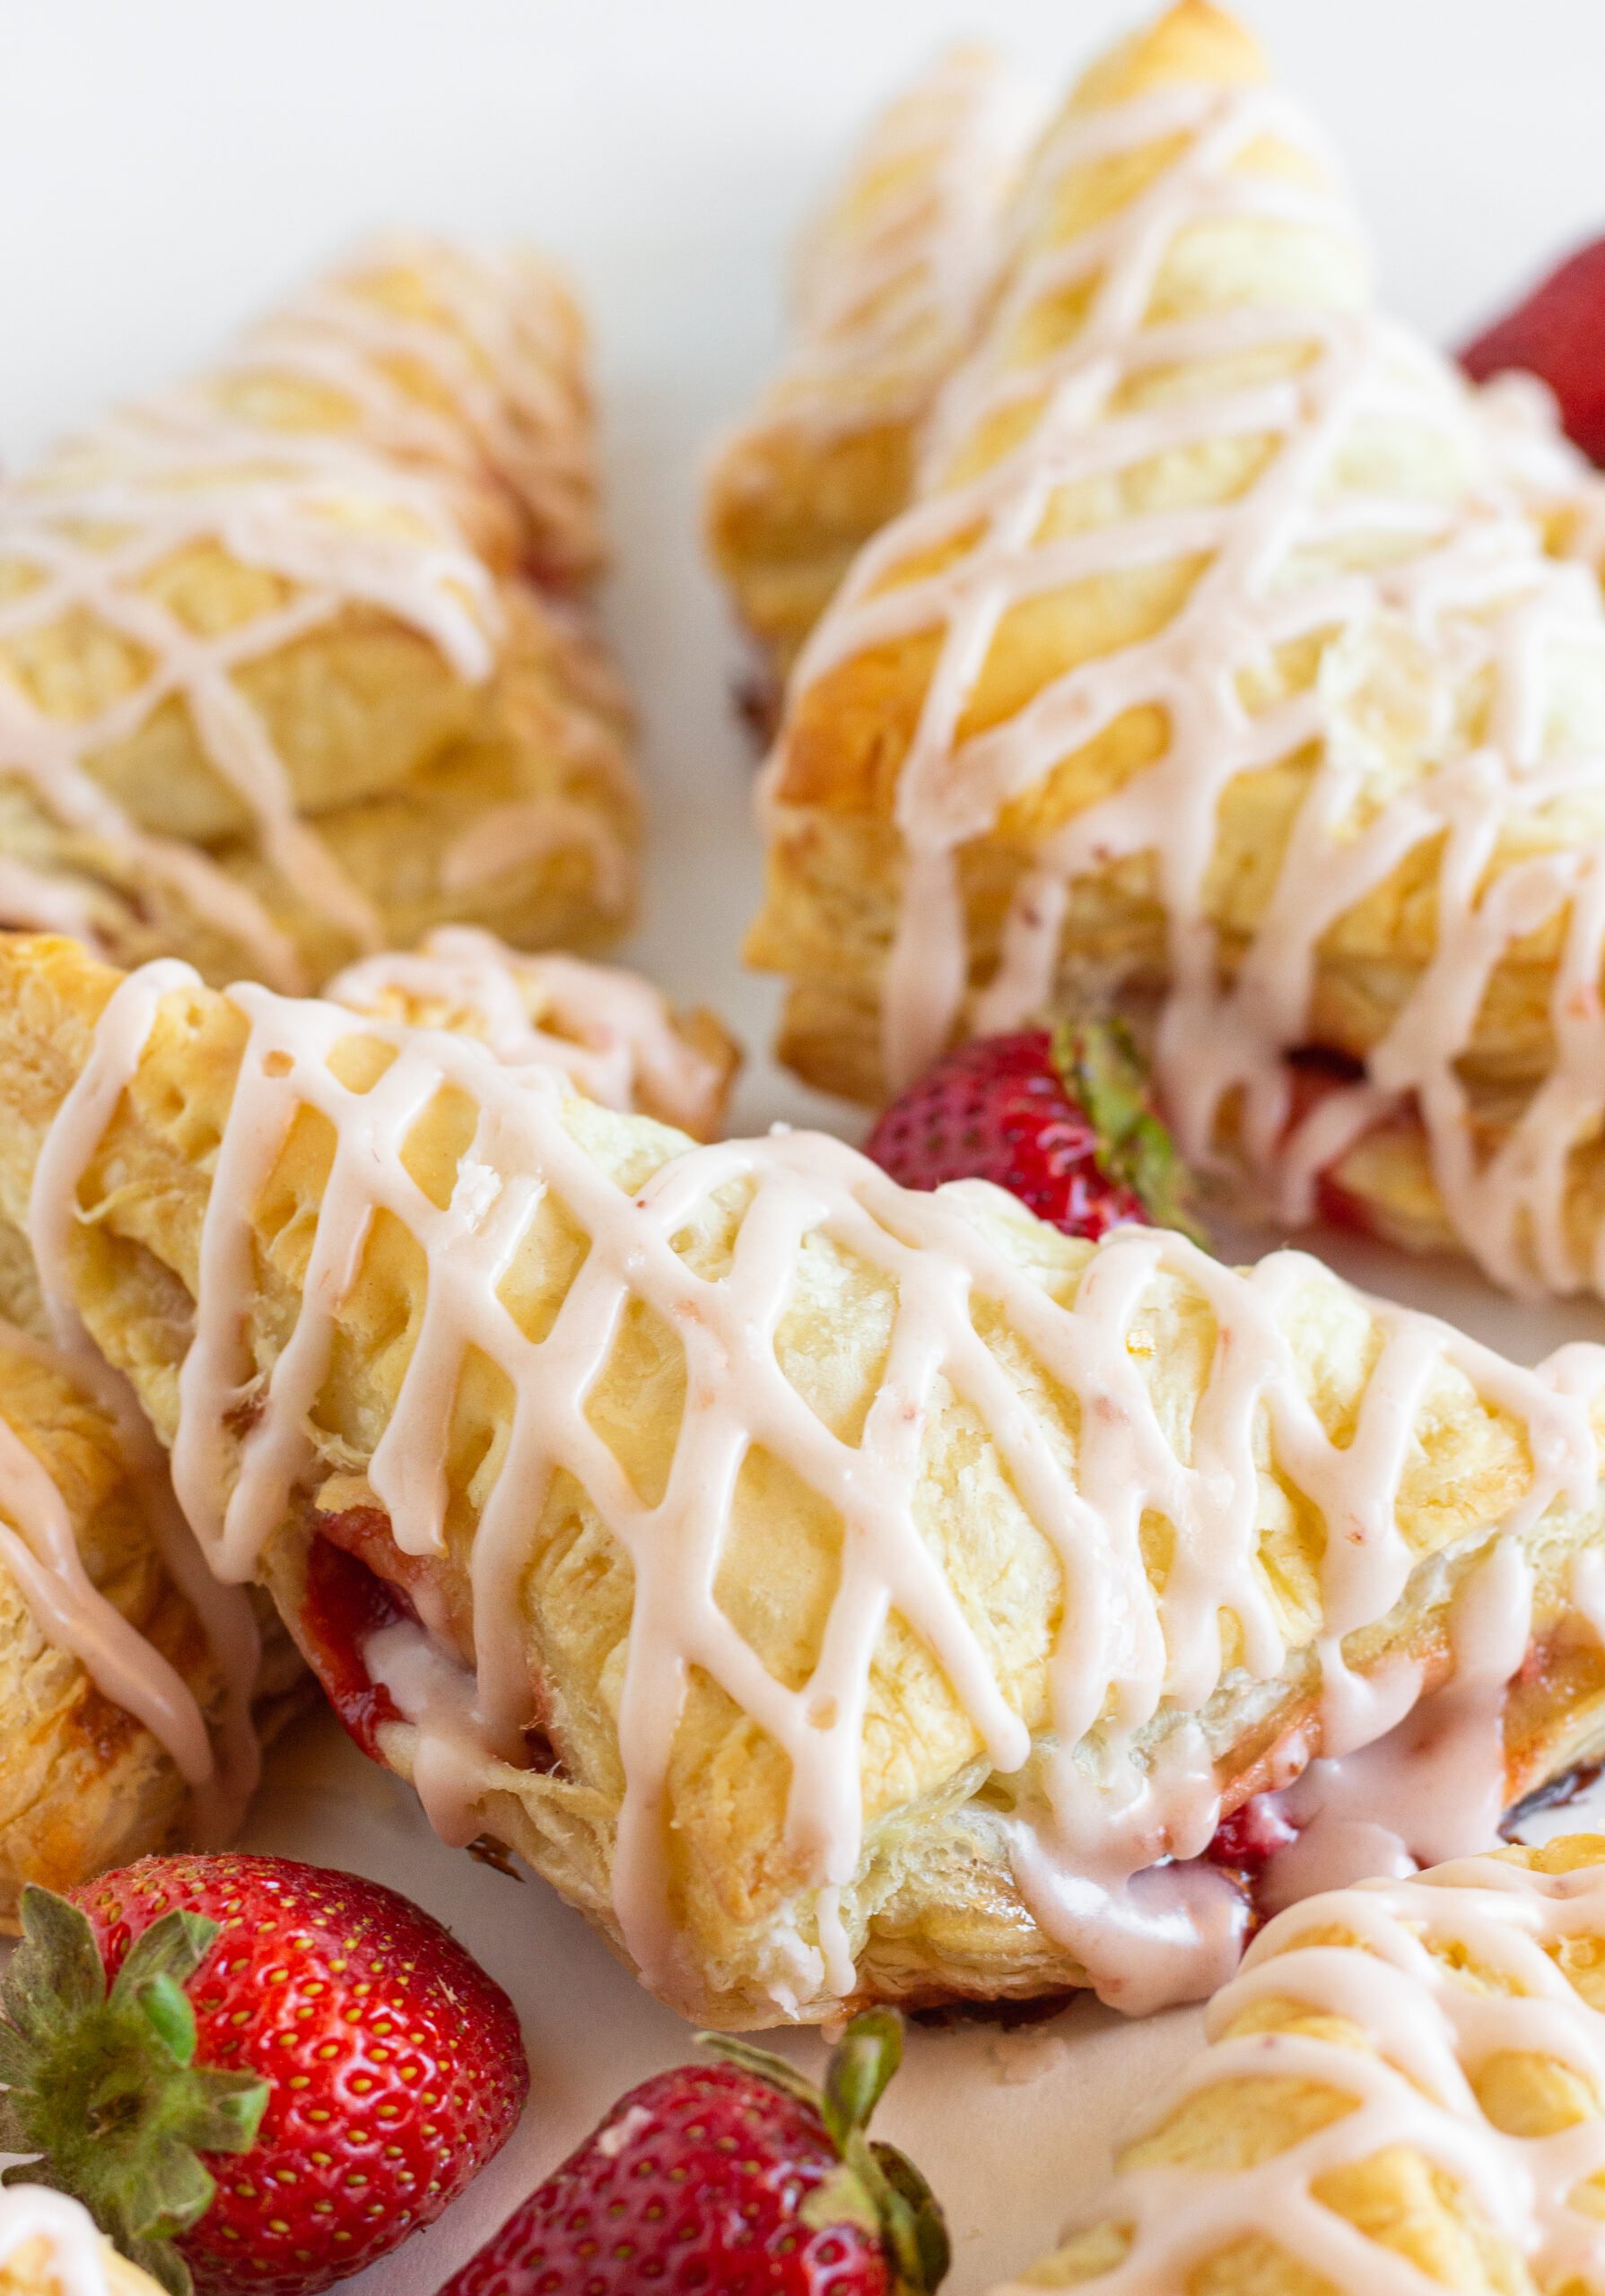 Easy Strawberry Turnovers Recipe, by Top US dessert blog Practically Homemade